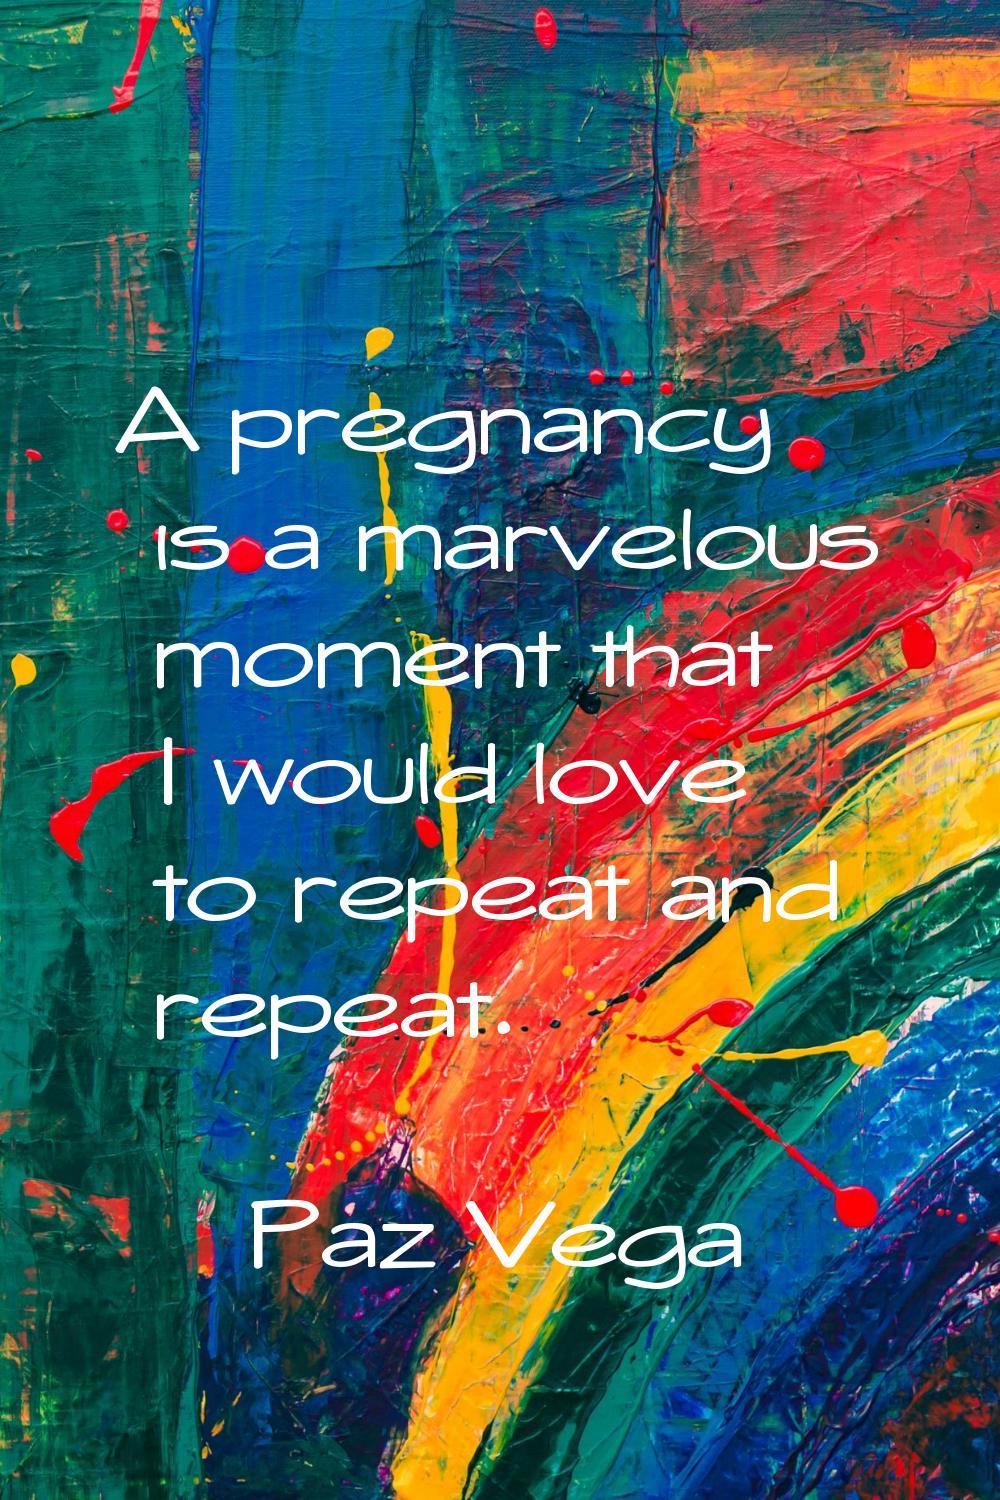 A pregnancy is a marvelous moment that I would love to repeat and repeat.